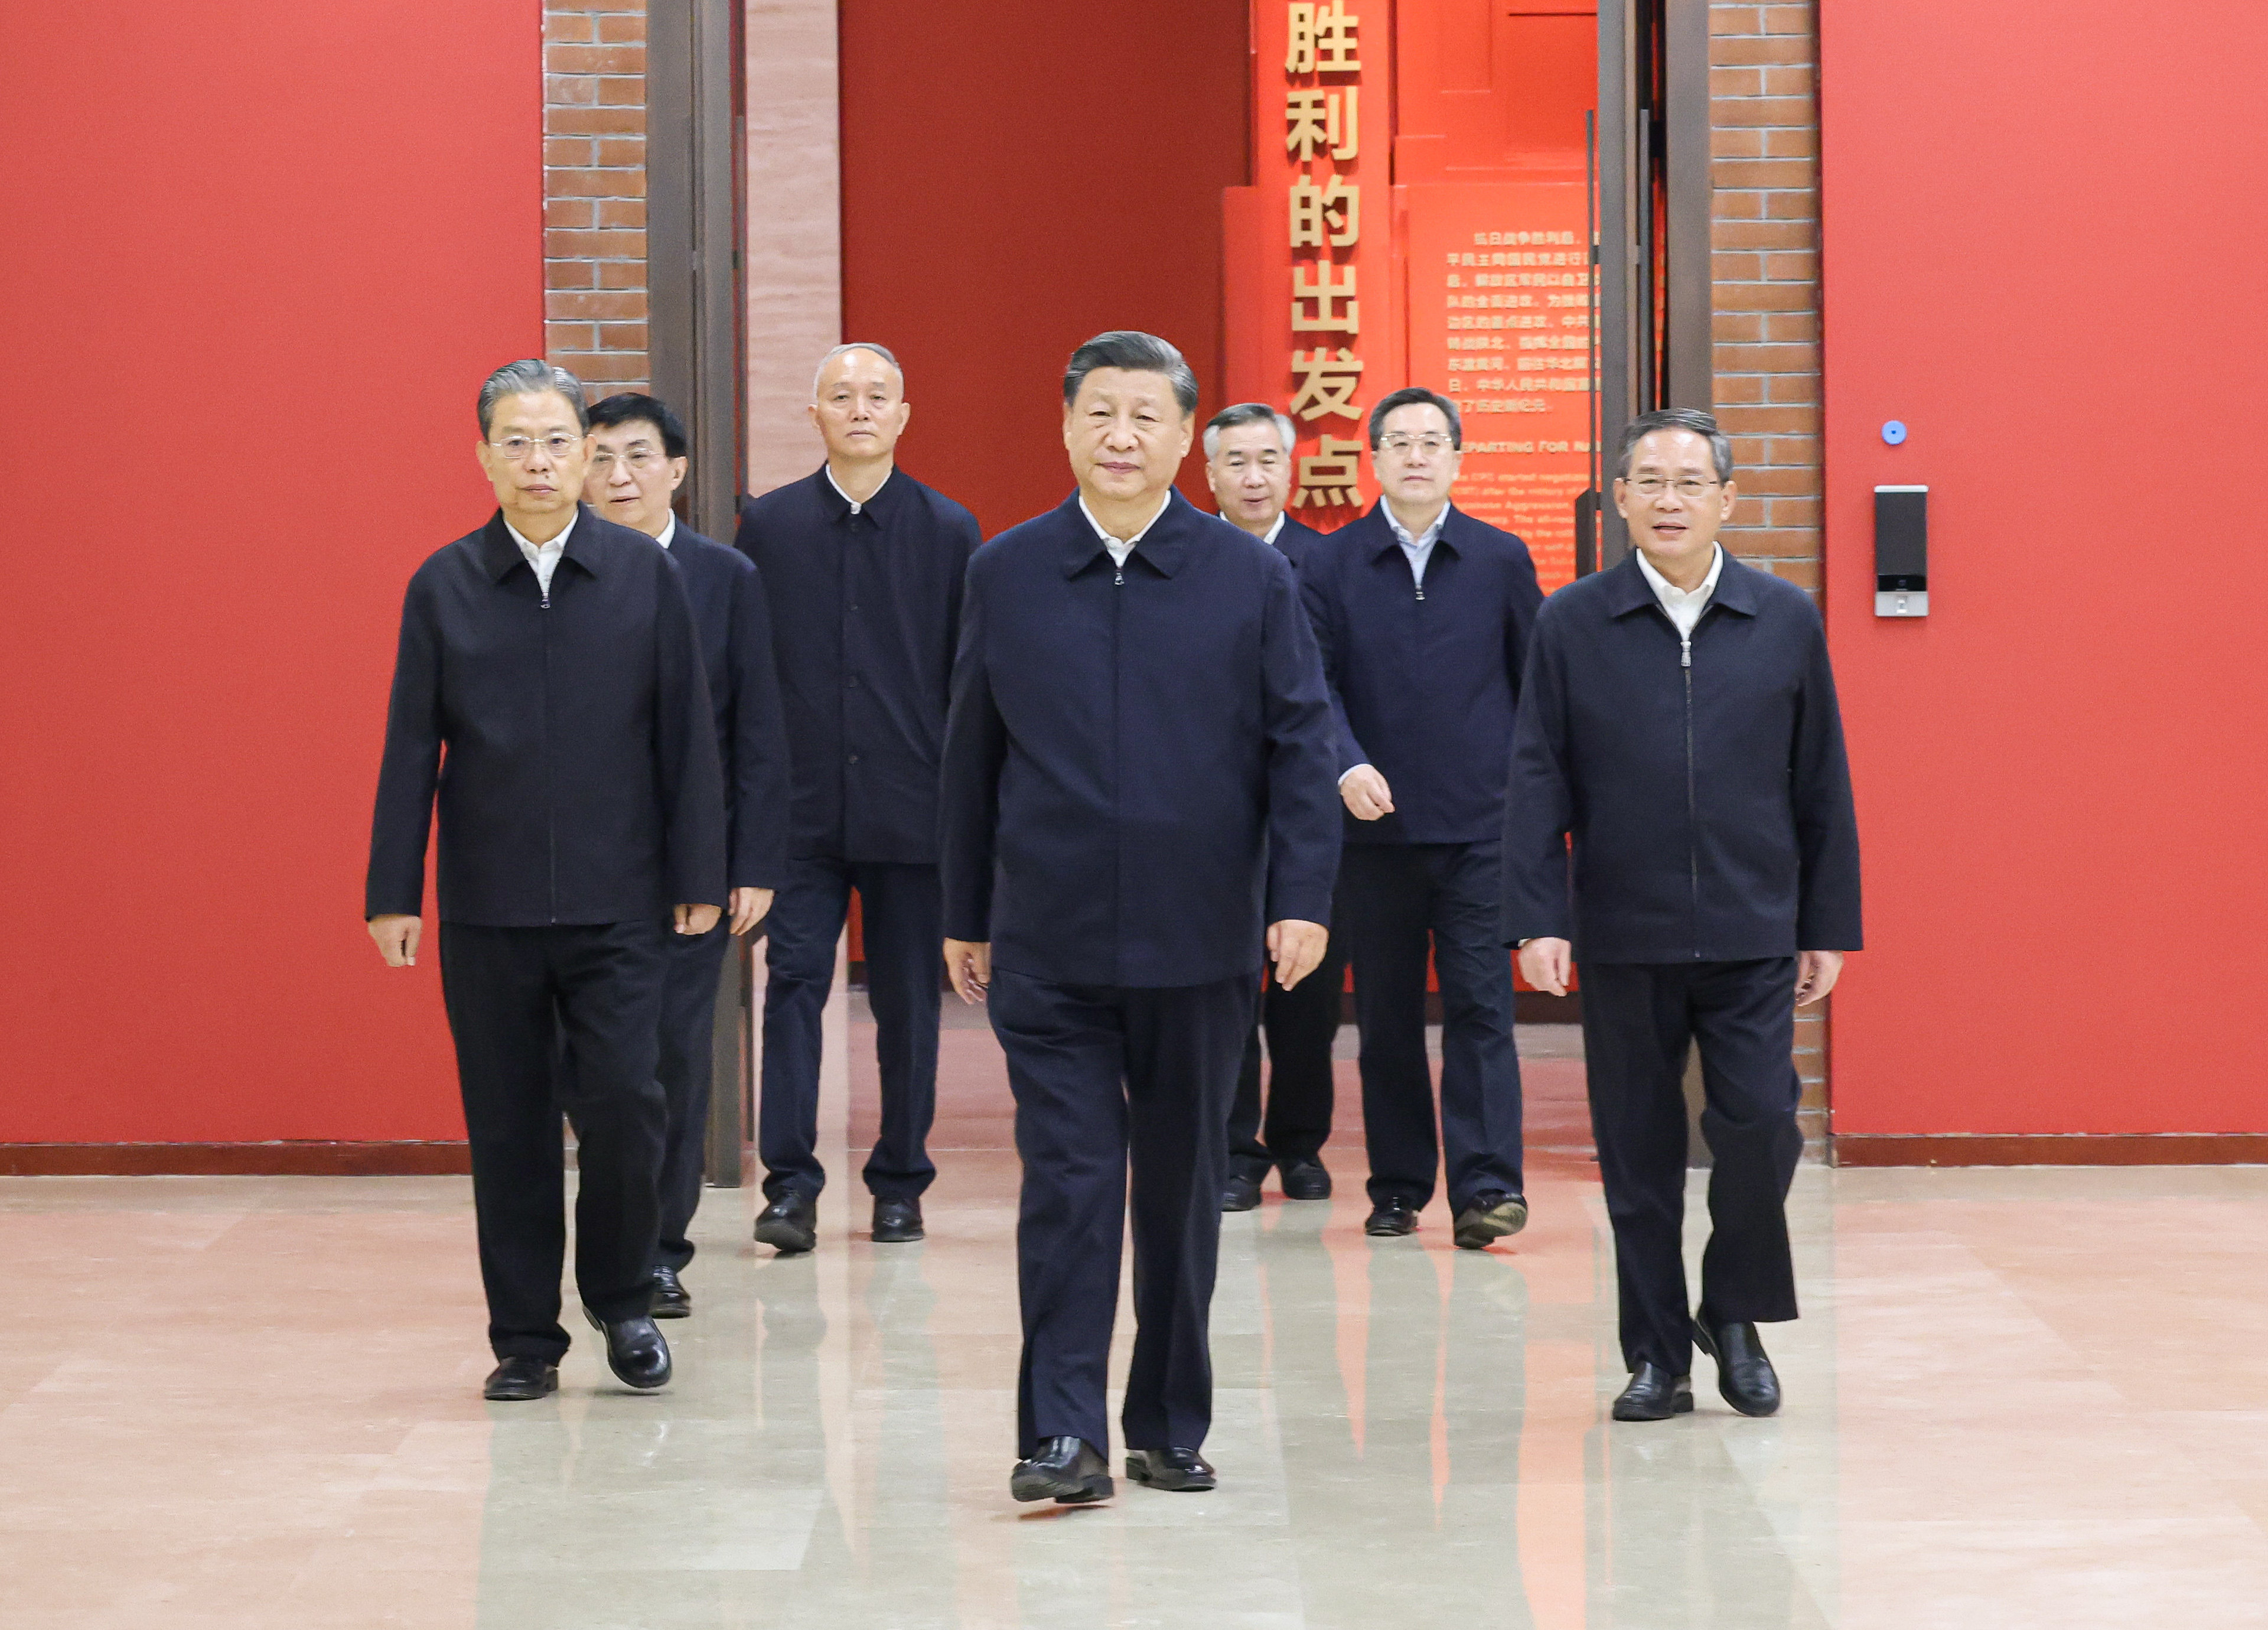 President Xi Jinping leads Communist Party officials during a visit to an exhibition at the Yan’an Revolutionary Memorial Hall in Yan’an, northwest Shaanxi province, on October 27, 2022. Photo: Xinhua